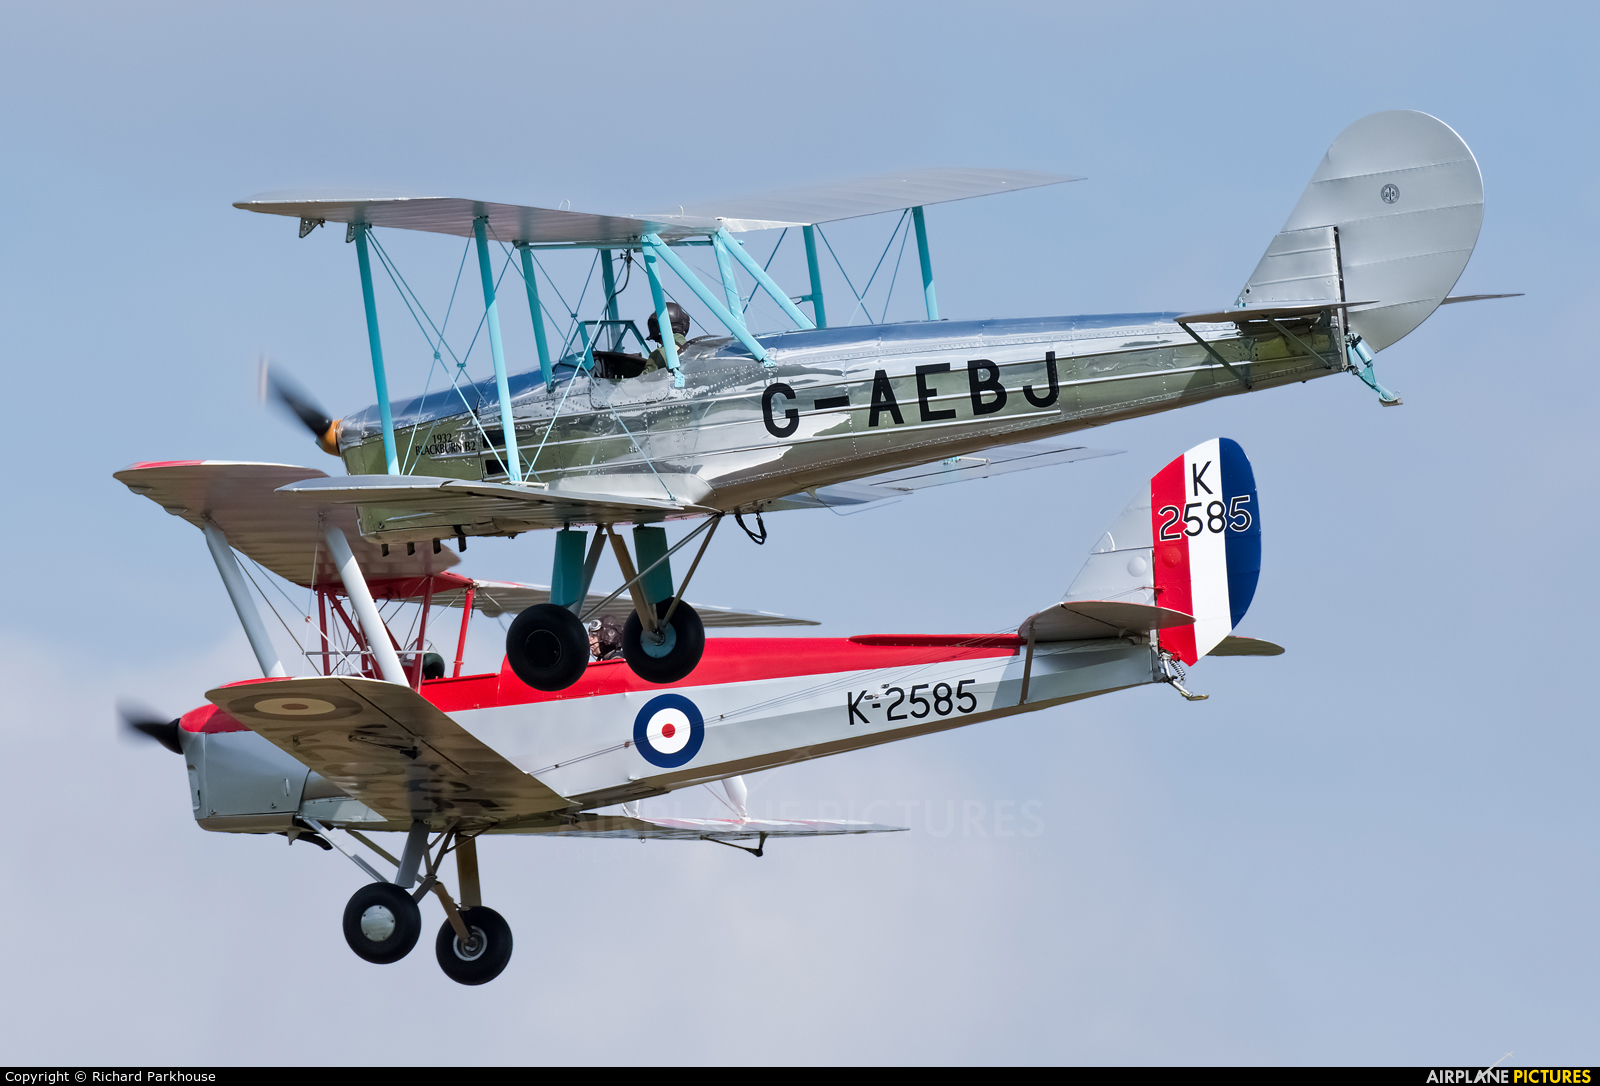 The Shuttleworth Collection G-AEBJ aircraft at Old Warden